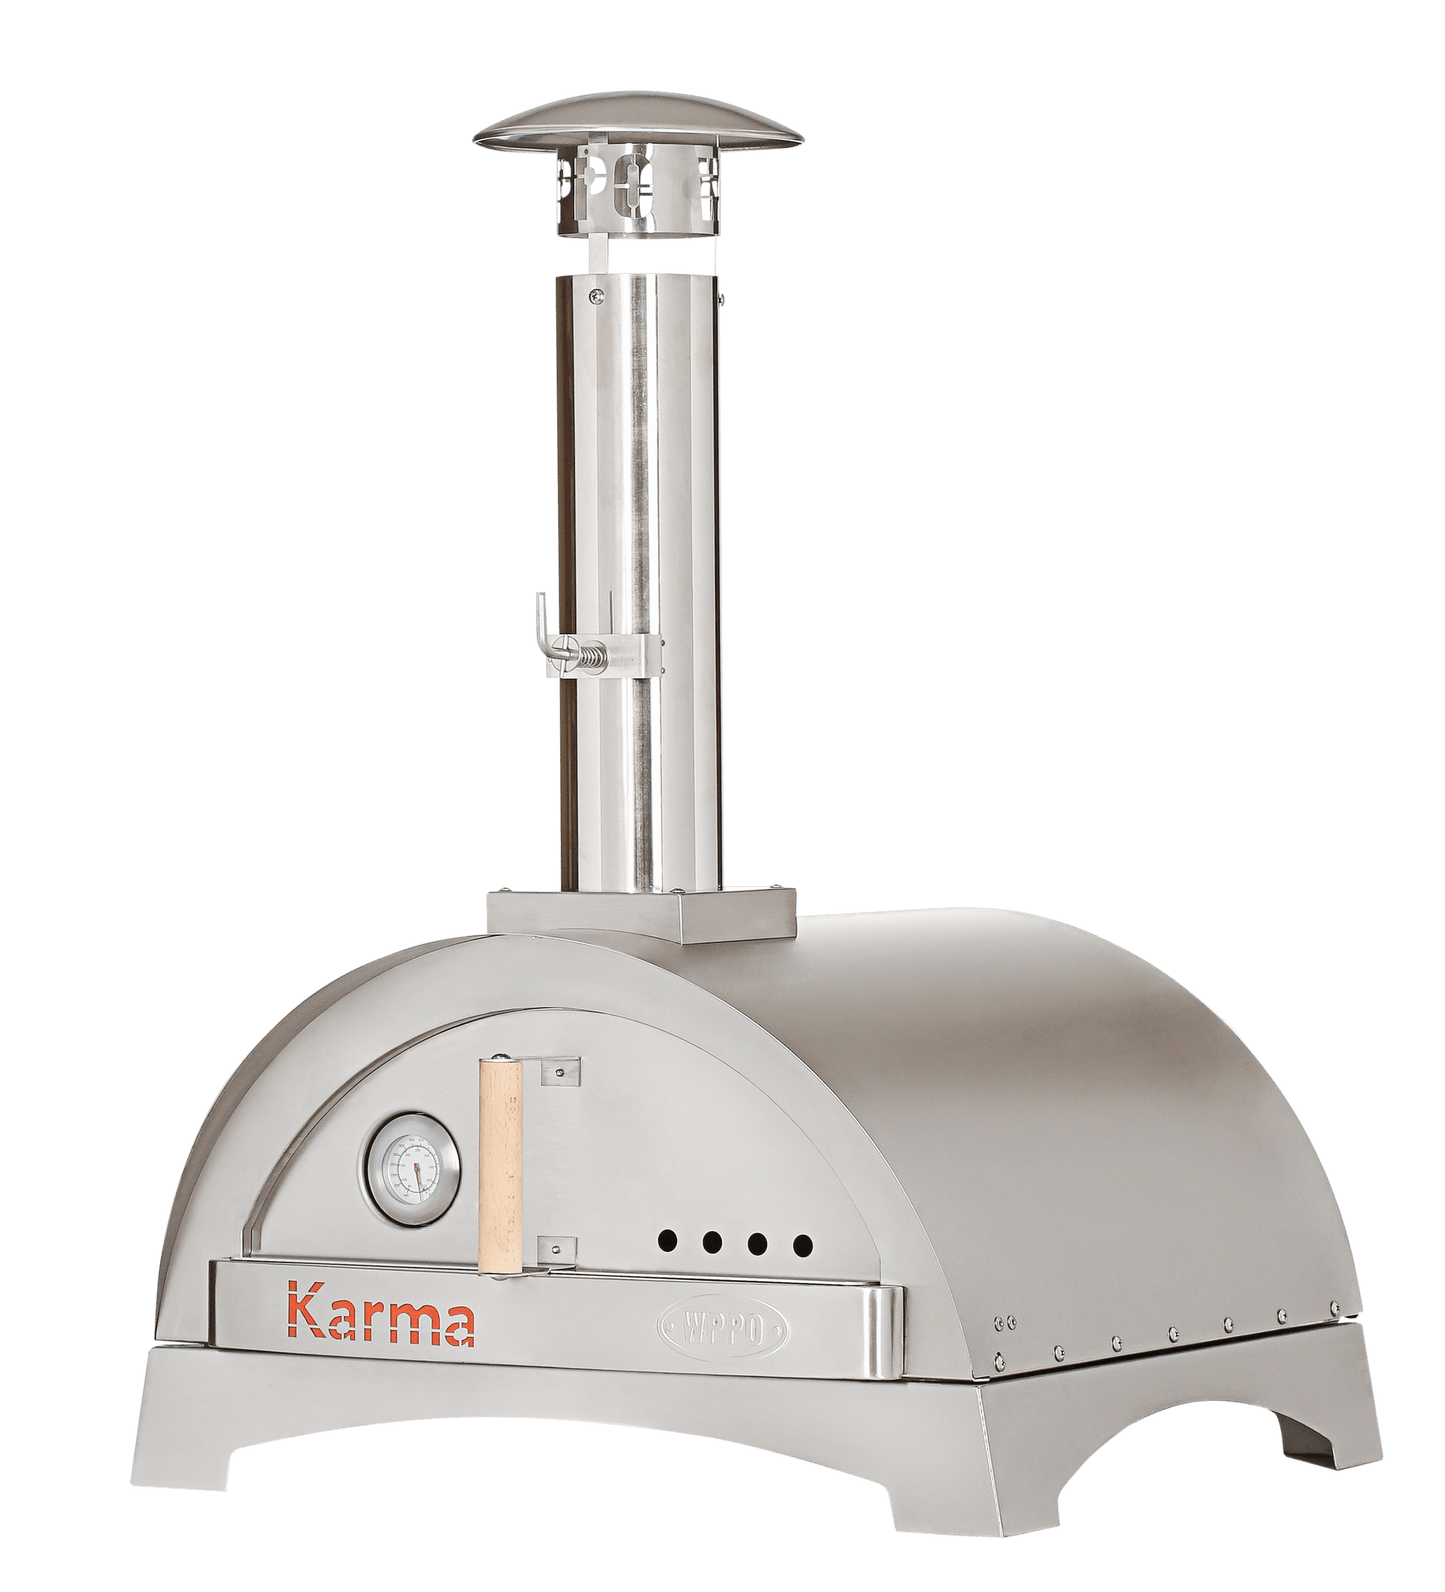 WPPO Wood Fired Pizza Oven, Karma 25 - 304SS W/ Base Karma 25 - 304SS With 201SS (includes counter top base) - Kitchen King Direct